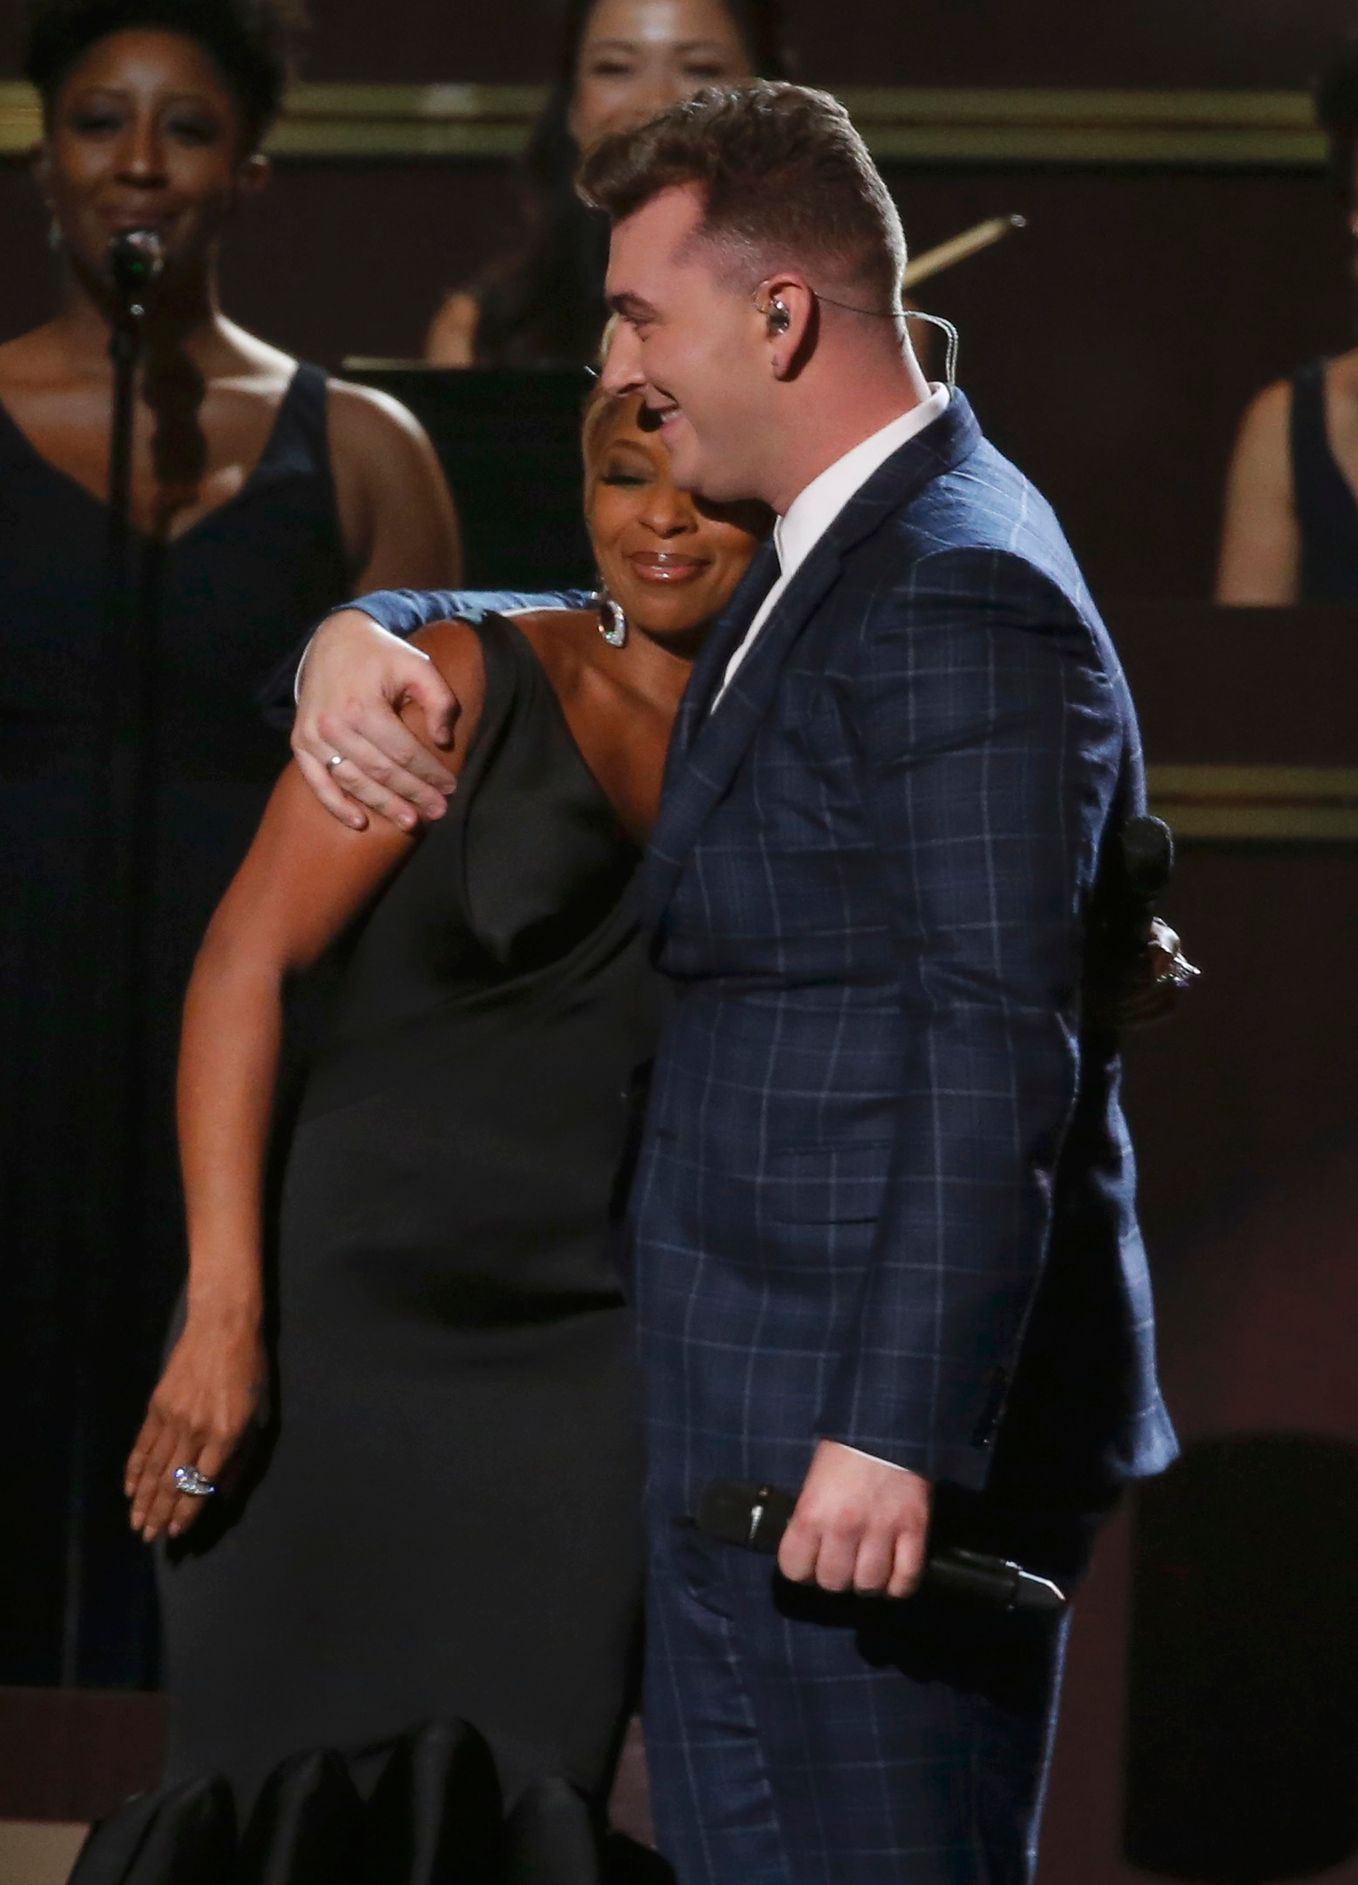 Sam Smith embraces Mary J. Blige after they performed &quot;Stay With Me&quot; at the 57th annual Grammy Awards in Los Angeles